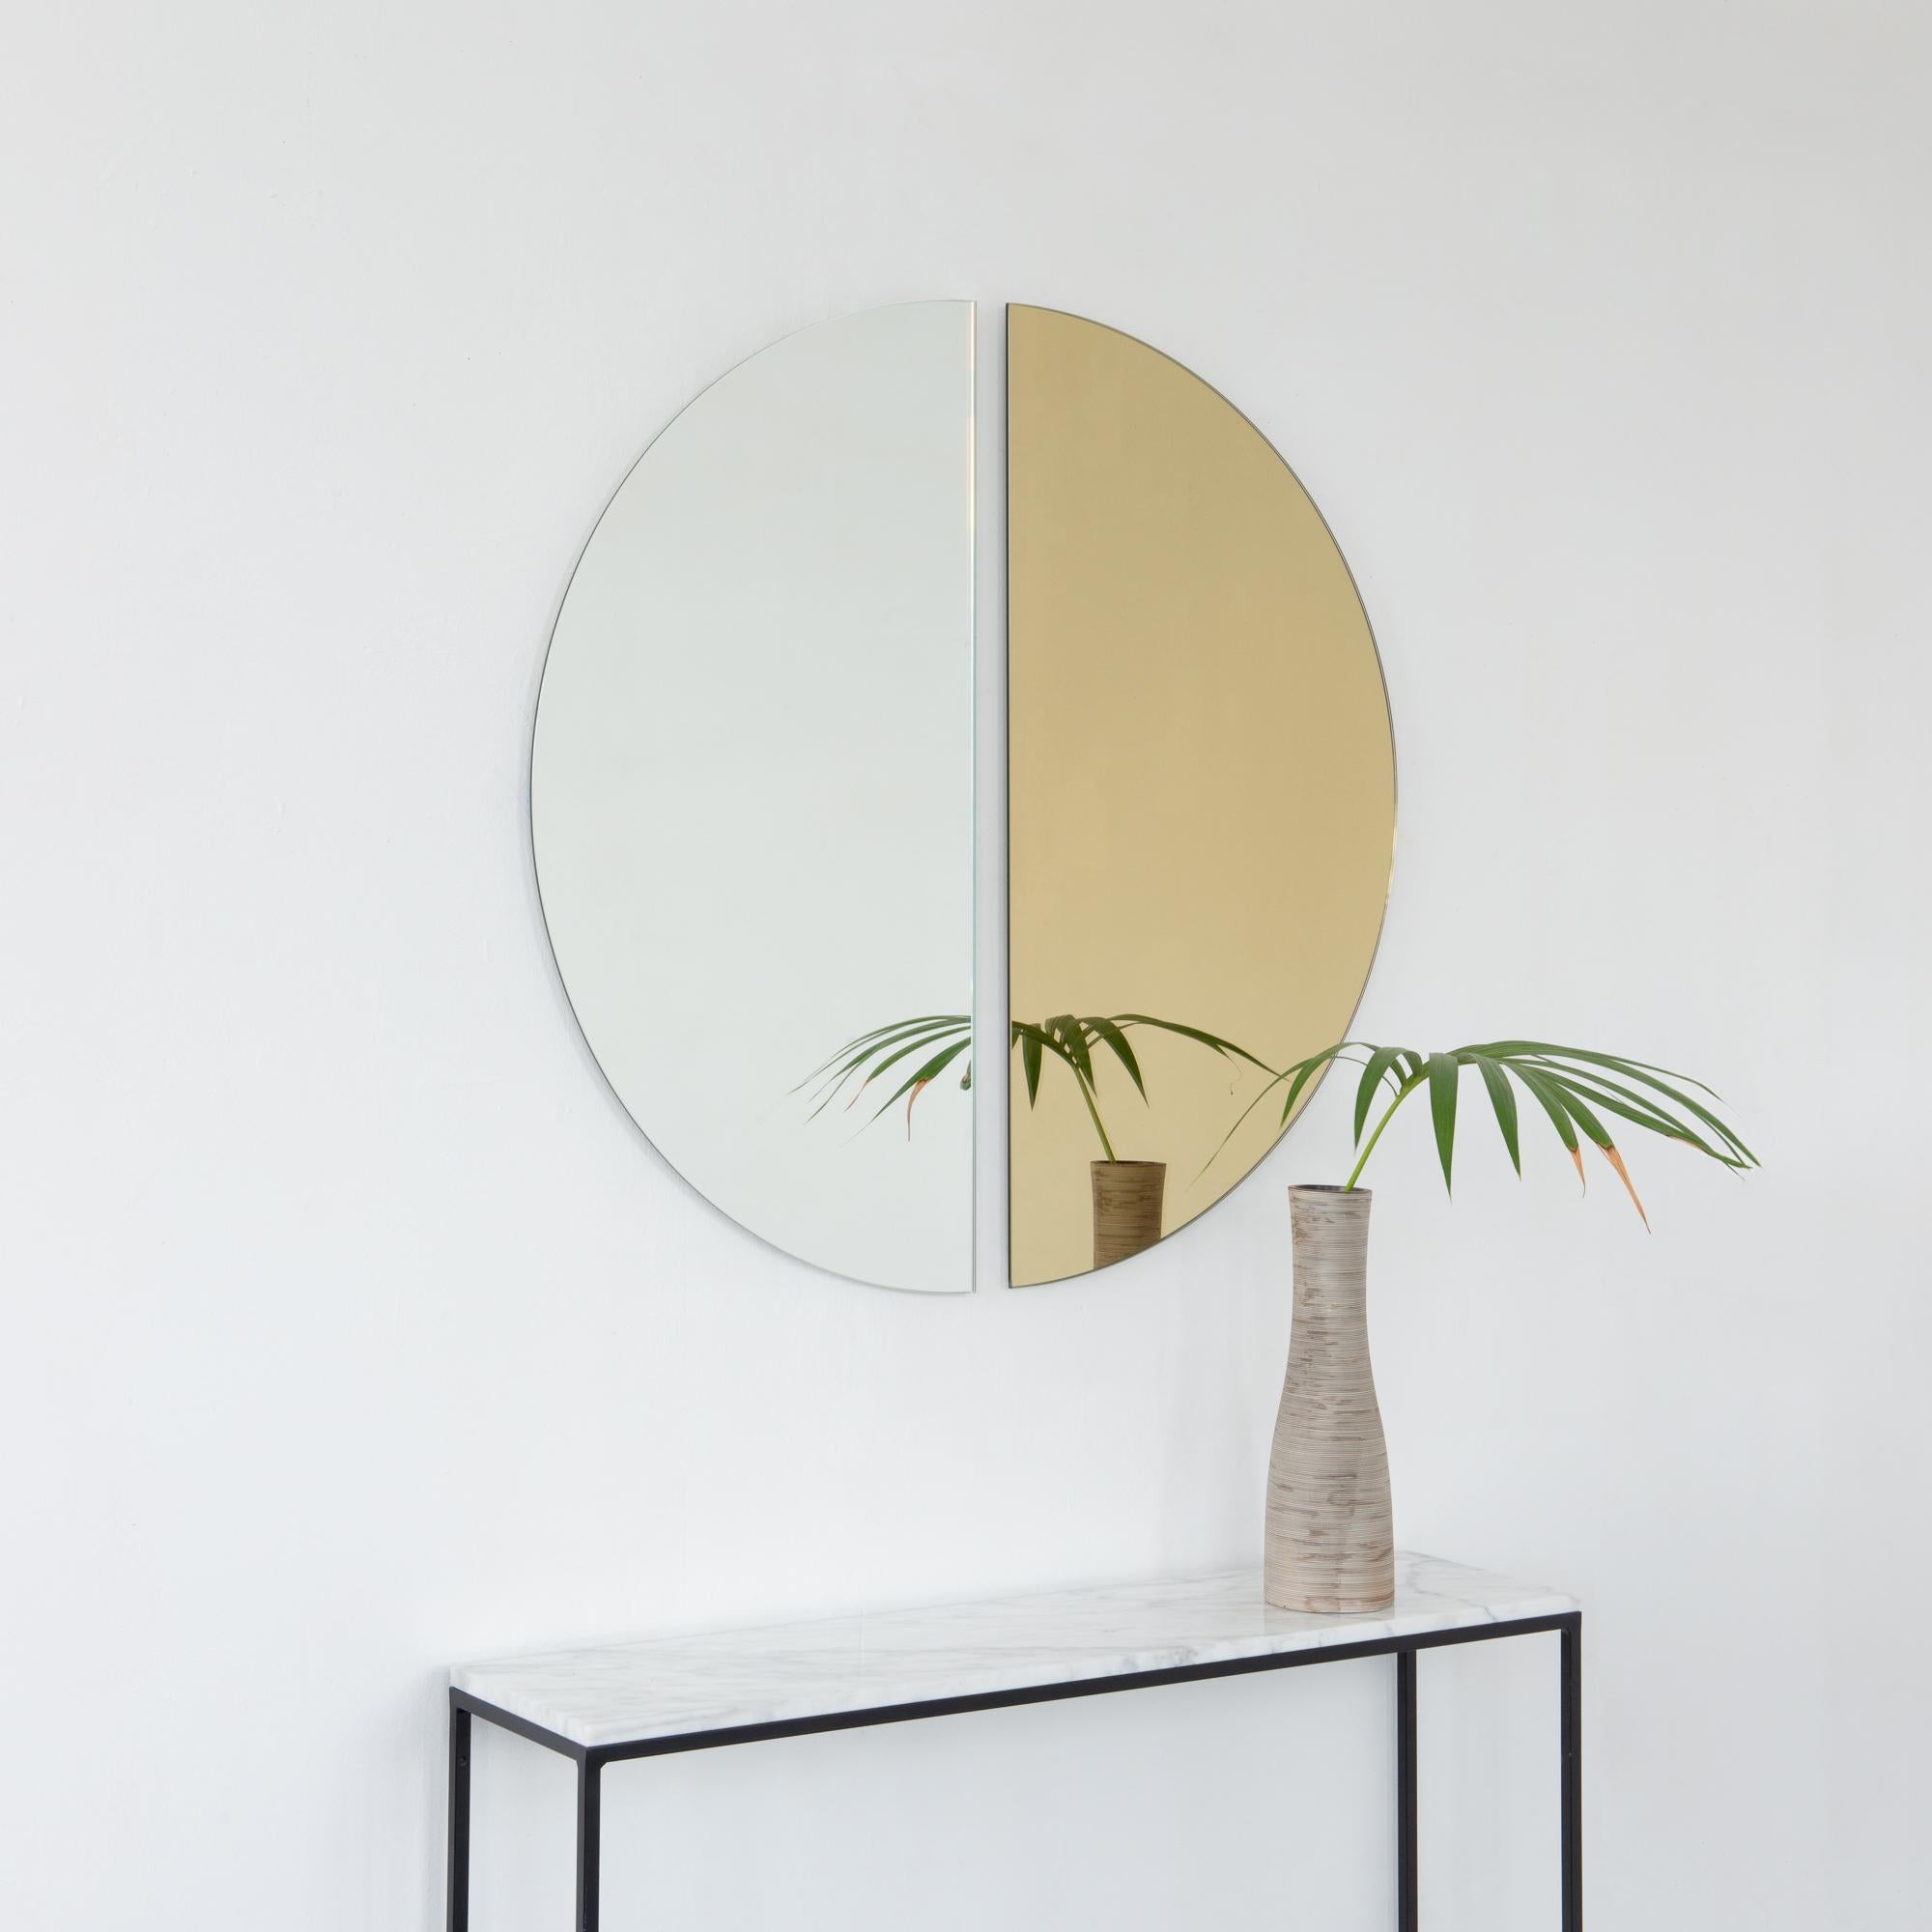 Set of two minimalist half-moon Luna™ standard silver + gold tinted frameless mirrors with a floating effect. Fitted with a quality hanging system for a flexible installation in 4 different directions. Designed and made in London, UK. 

Our mirrors